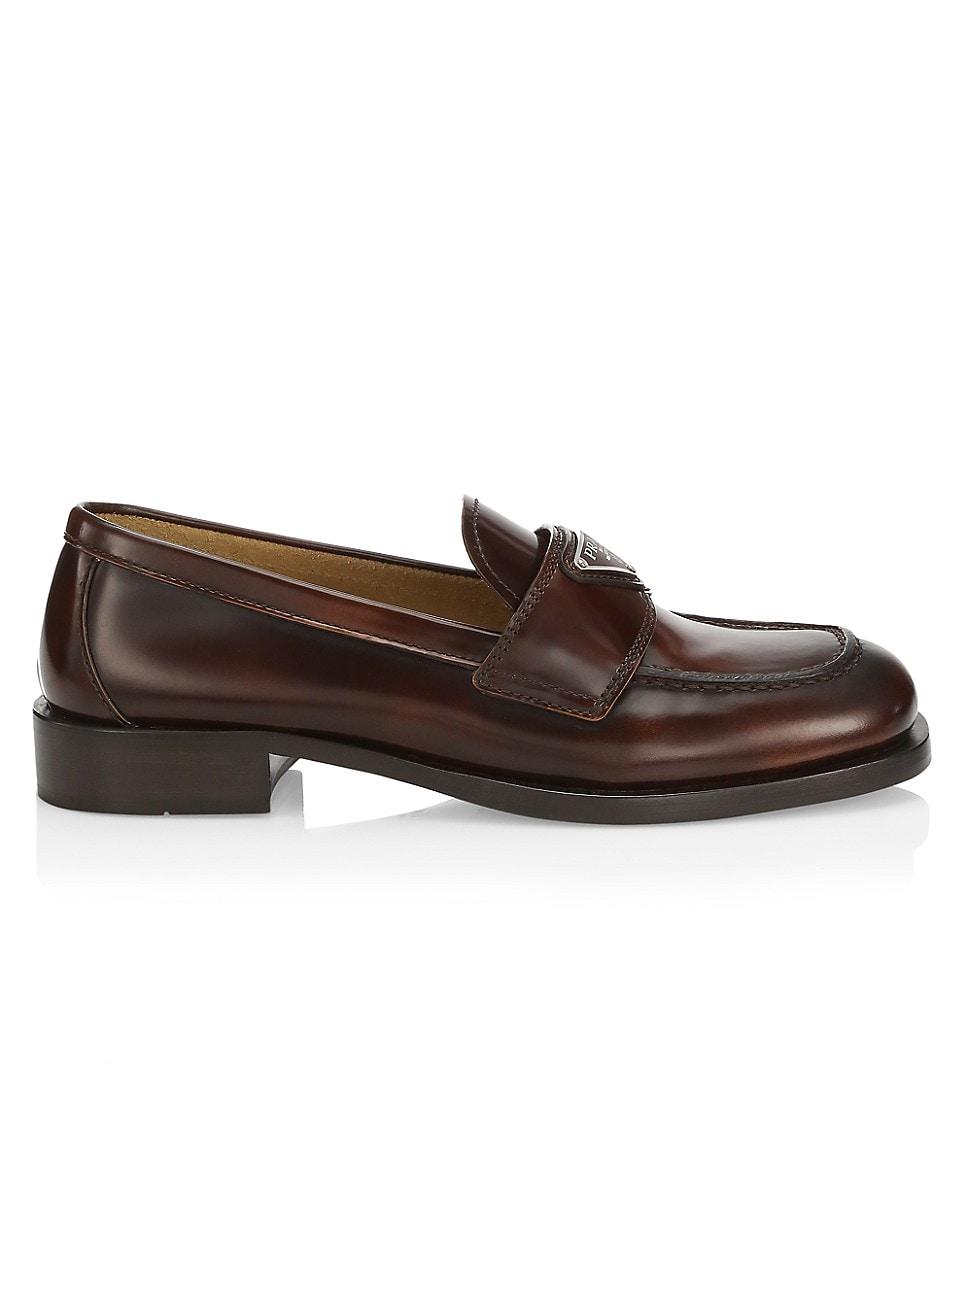 Prada Logo Leather Loafers in Tobacco (Brown) | Lyst